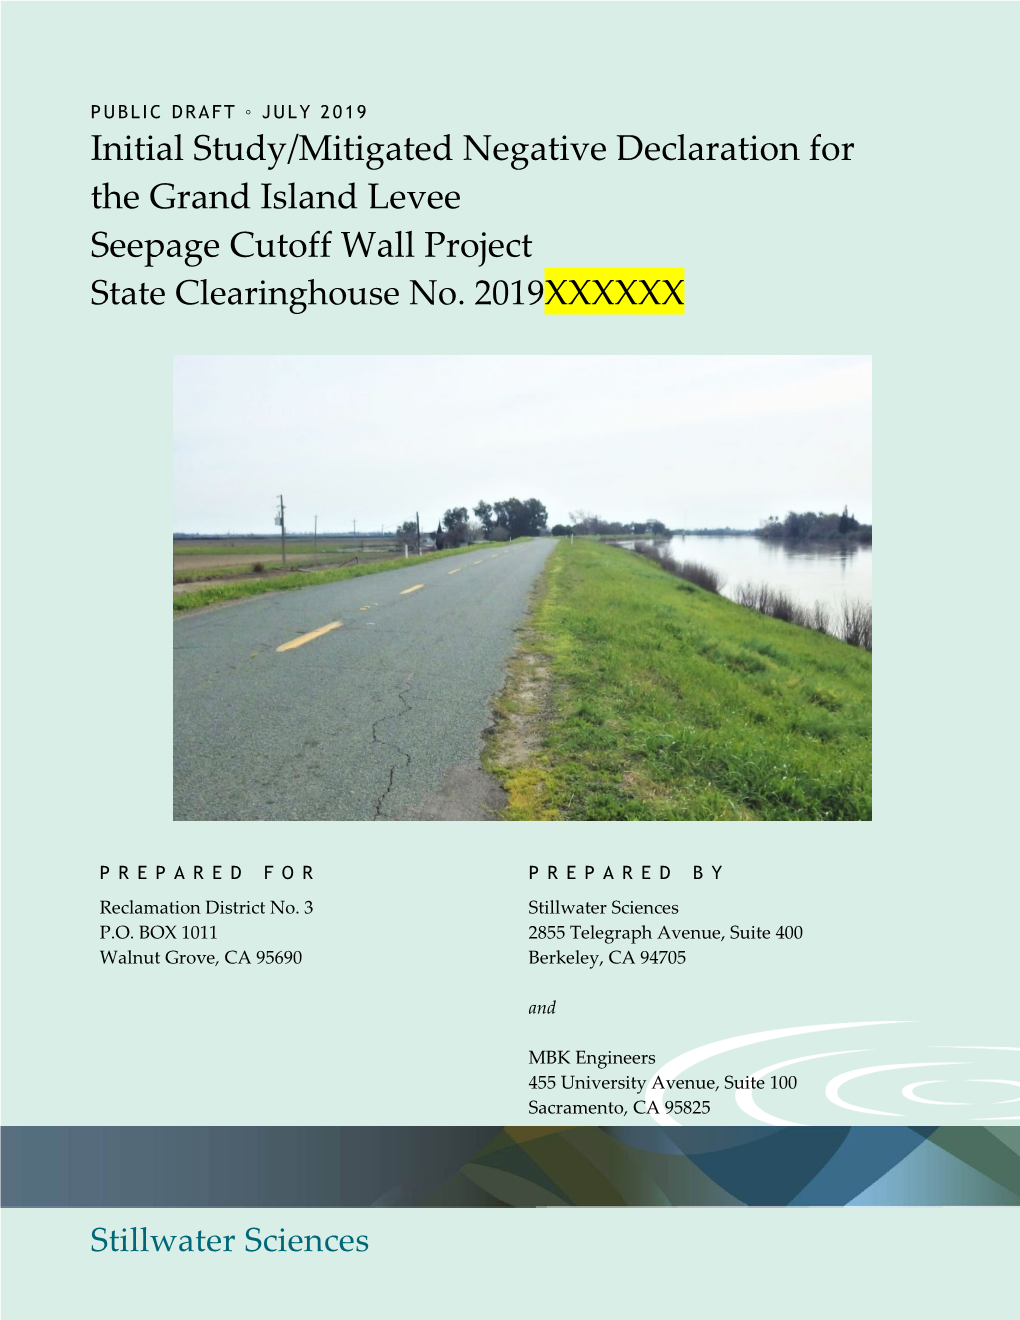 Initial Study/Mitigated Negative Declaration for the Grand Island Levee Seepage Cutoff Wall Project State Clearinghouse No